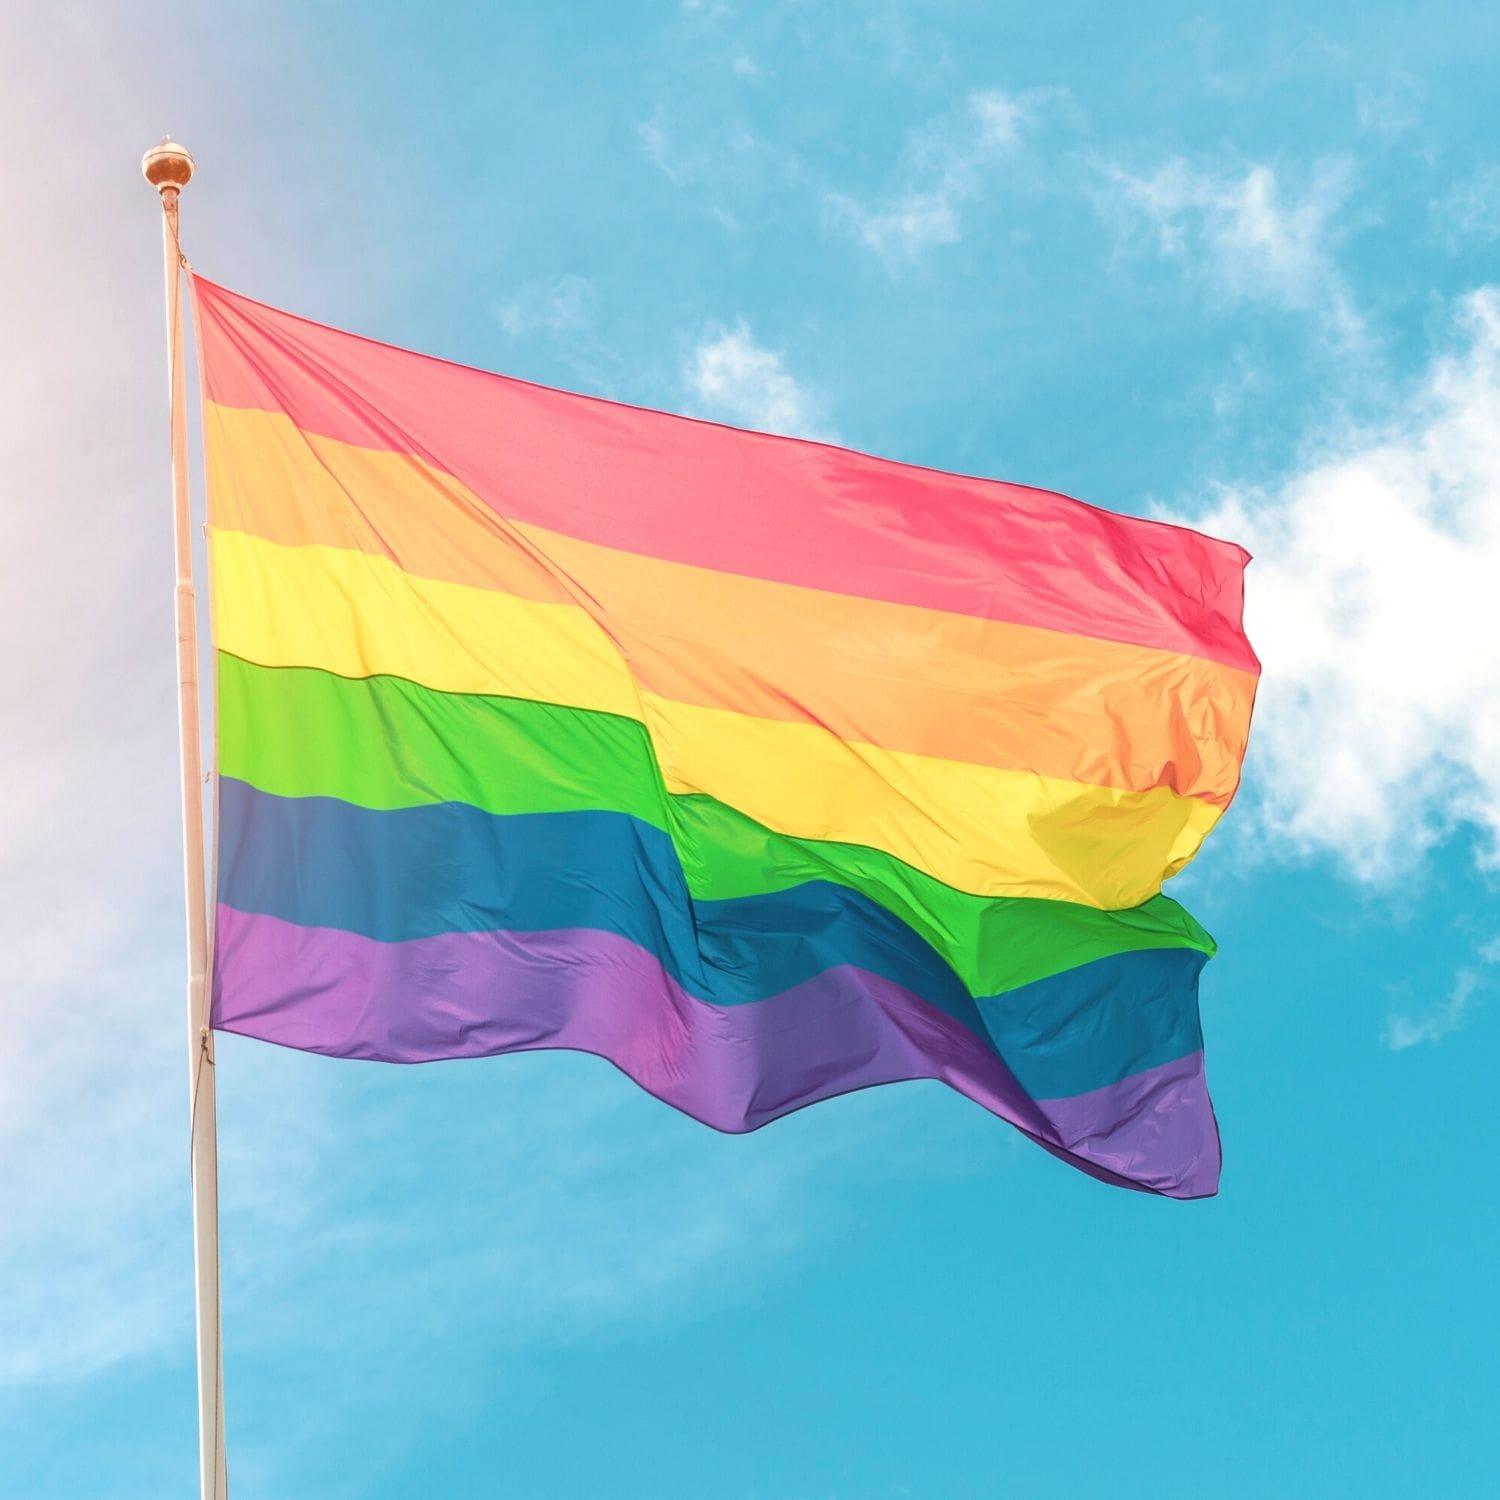 Vibrant image of a colorful LGBTQ Rainbow Pride Flag waving against the sky, part of the TOMSCOUT LGBTQ+ Classic Pride Flag collection.